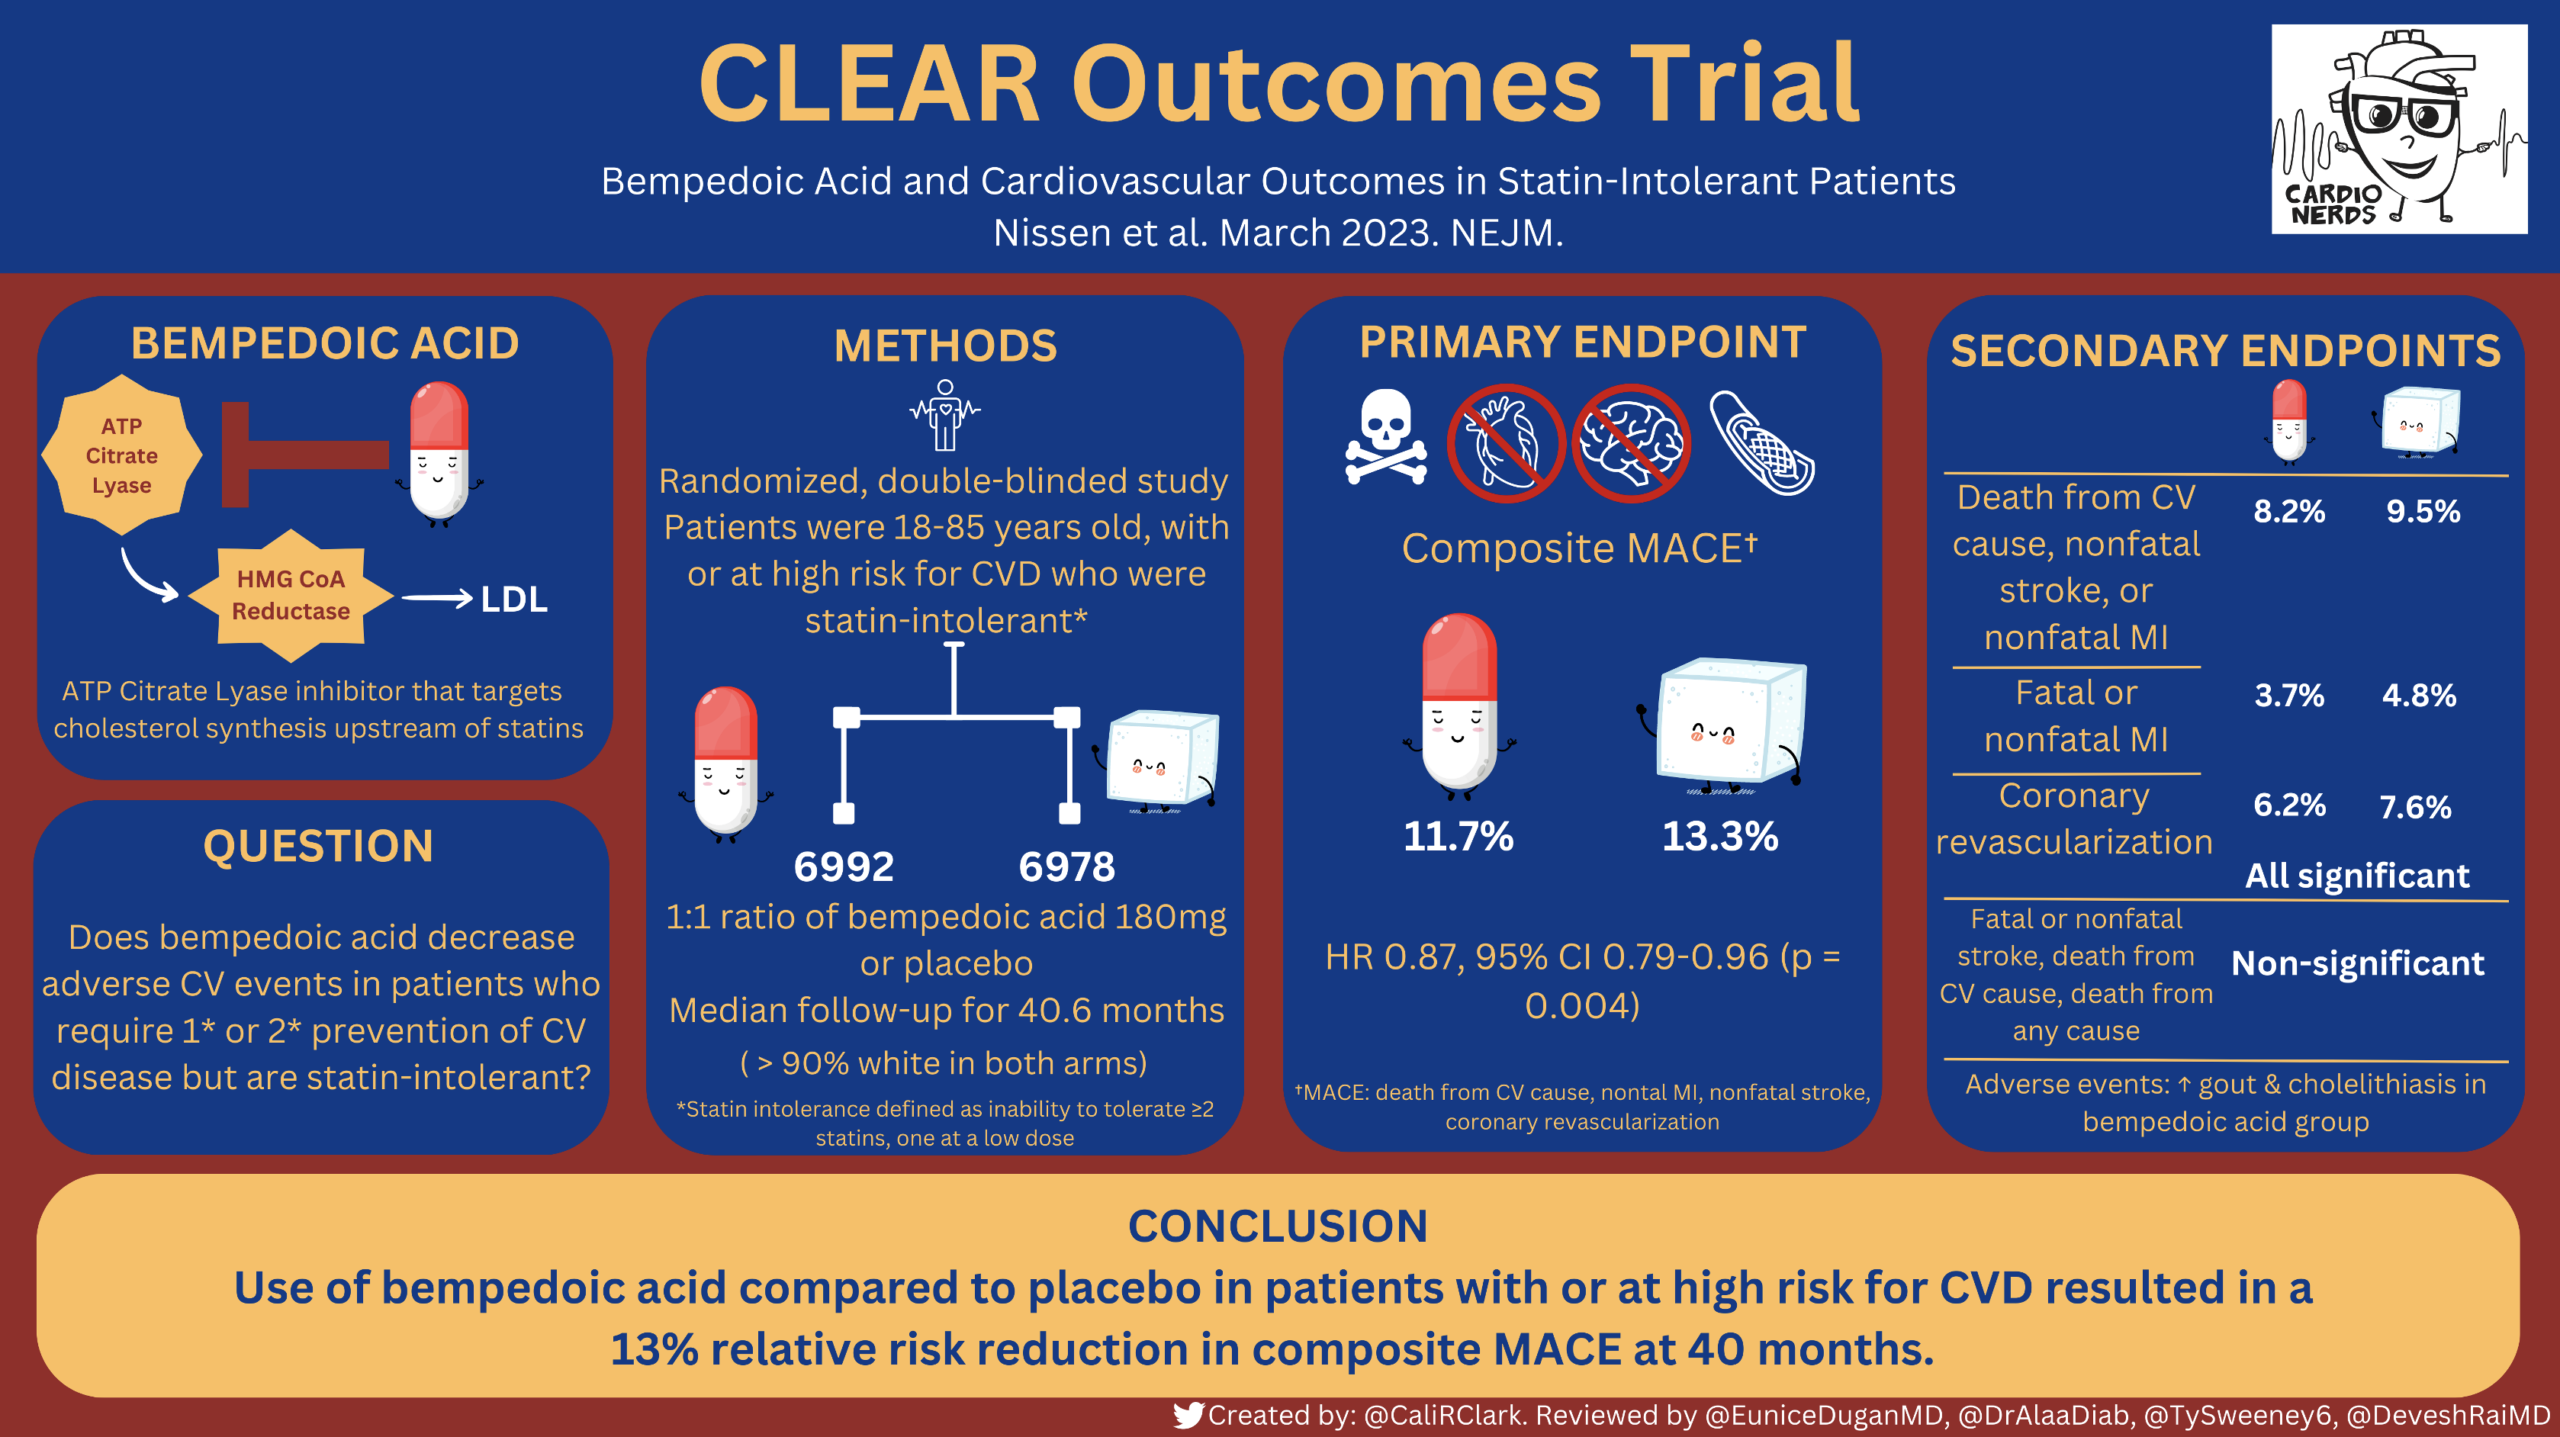 Cardsjc Bempedoic Acid And Cardiovascular Outcomes In Statin Intolerant Patients The Clear Trial